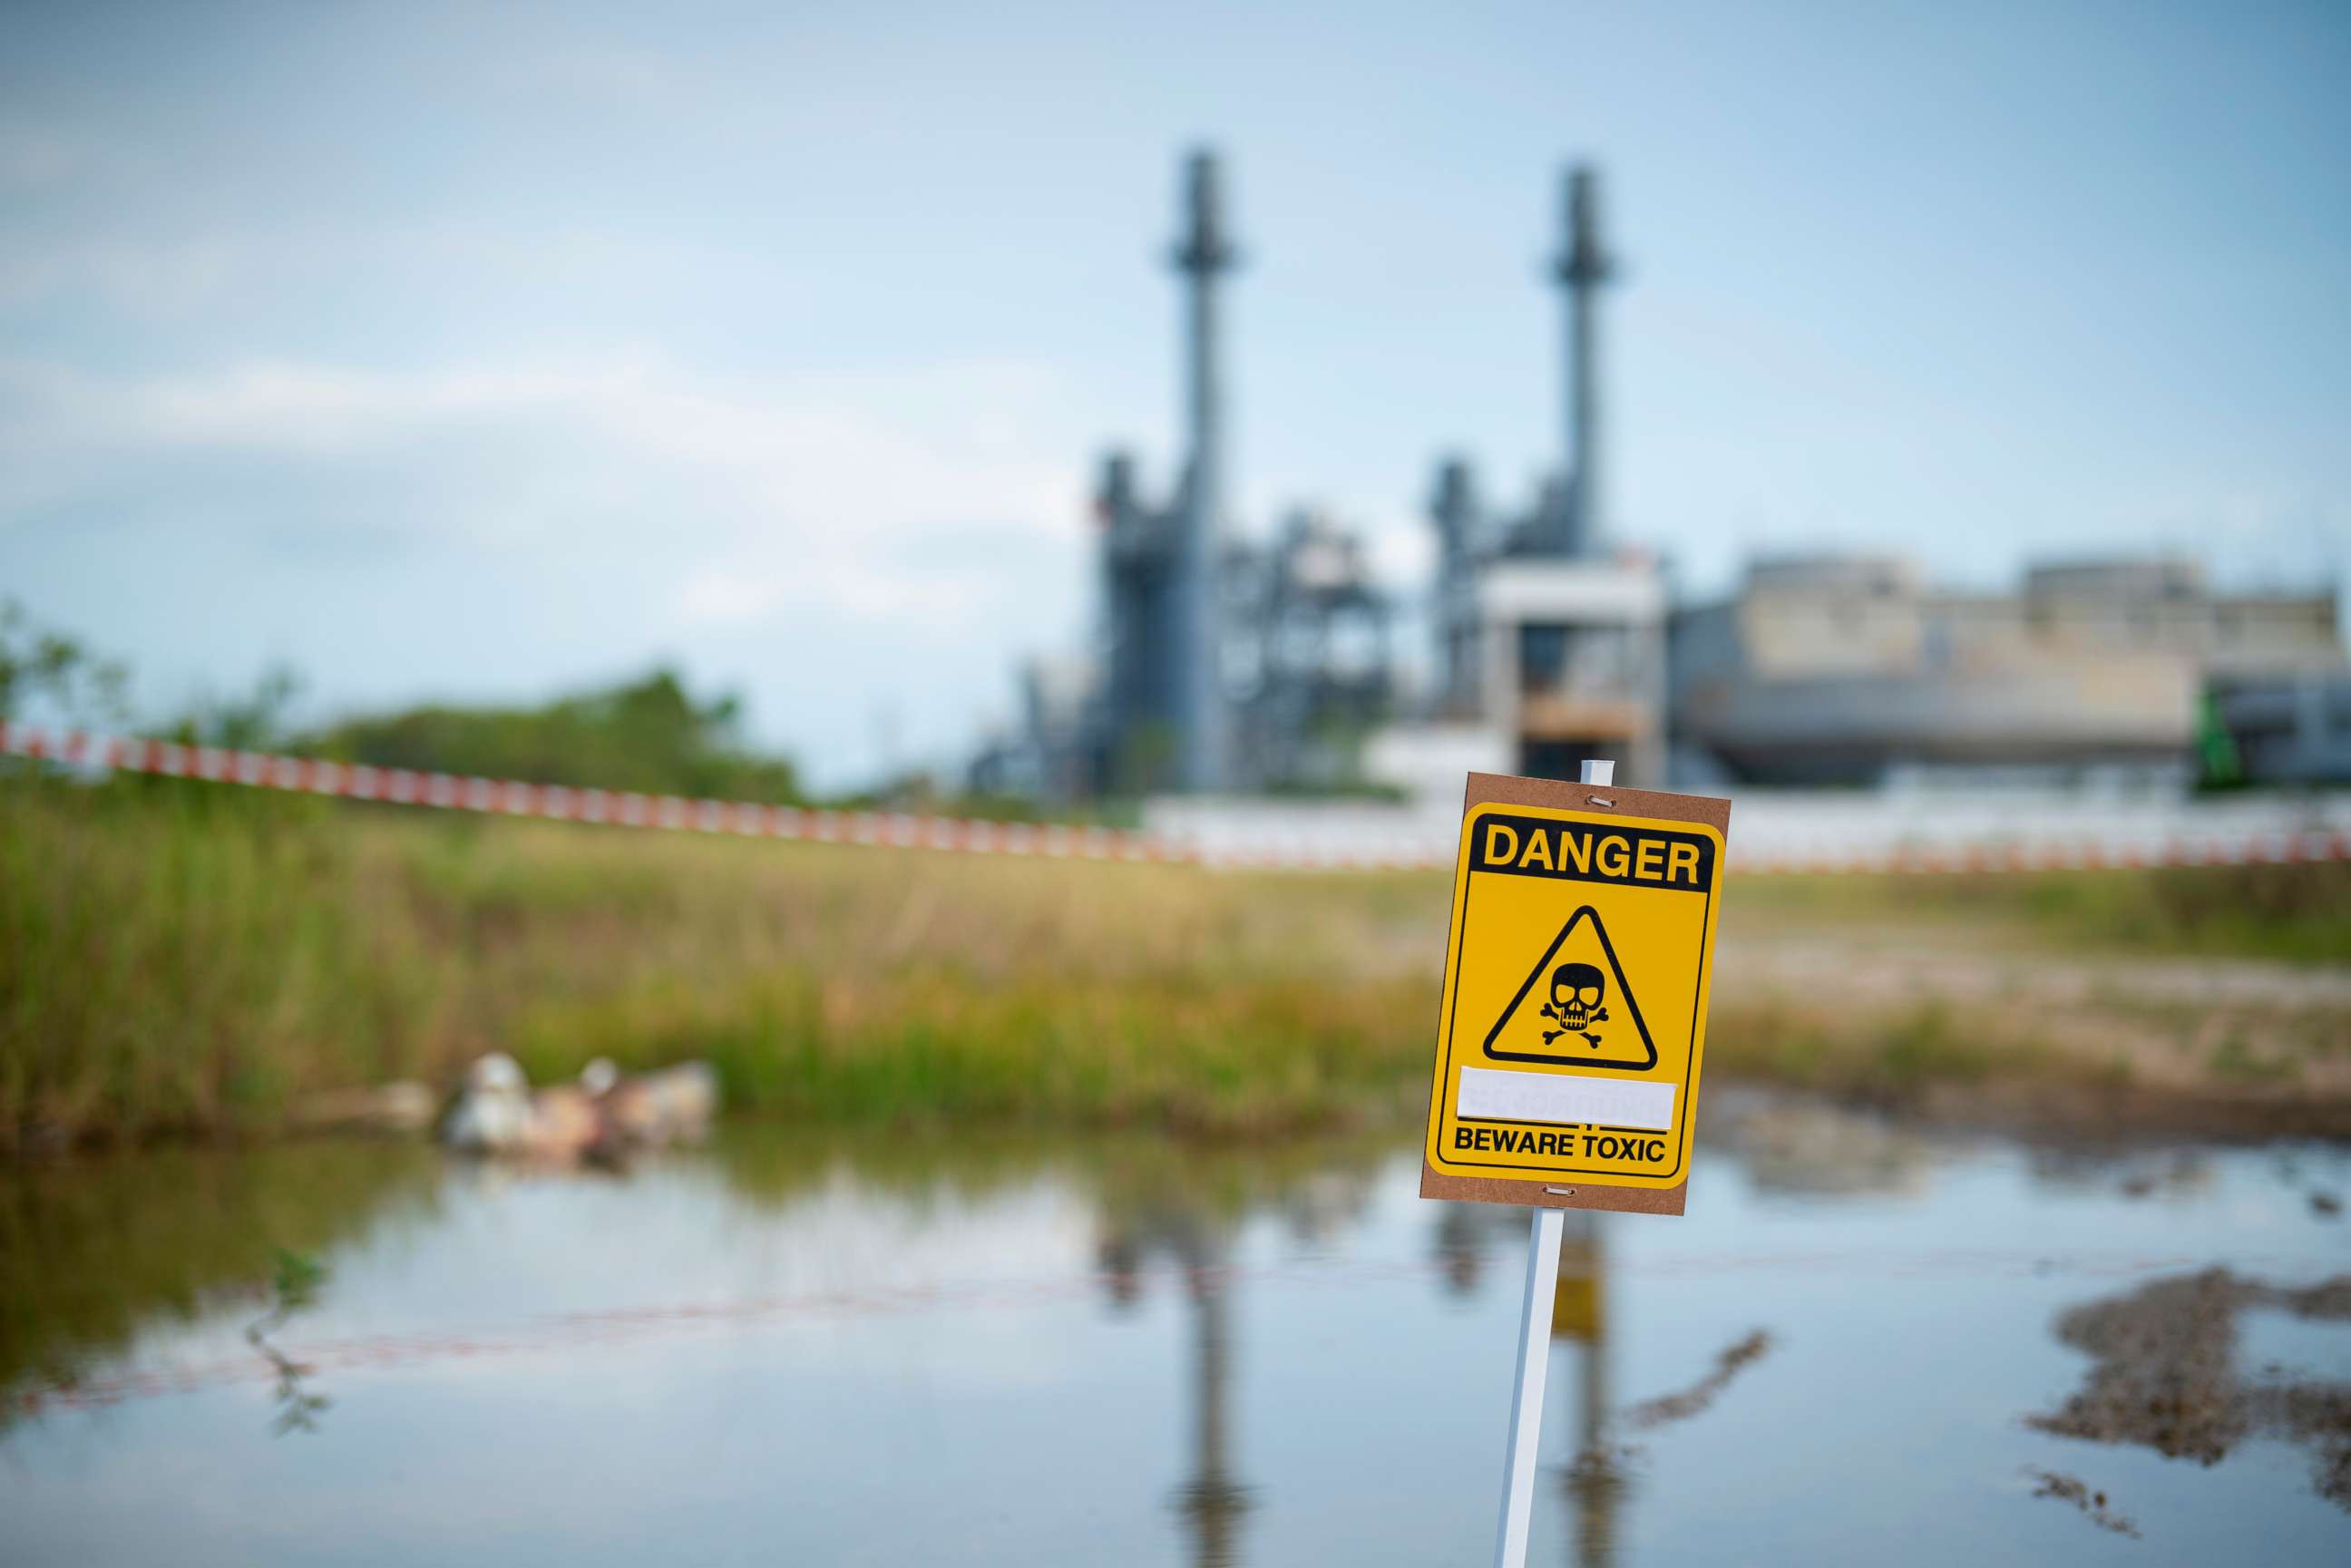 PHOTO: Stock photo of a hazard sign in water.